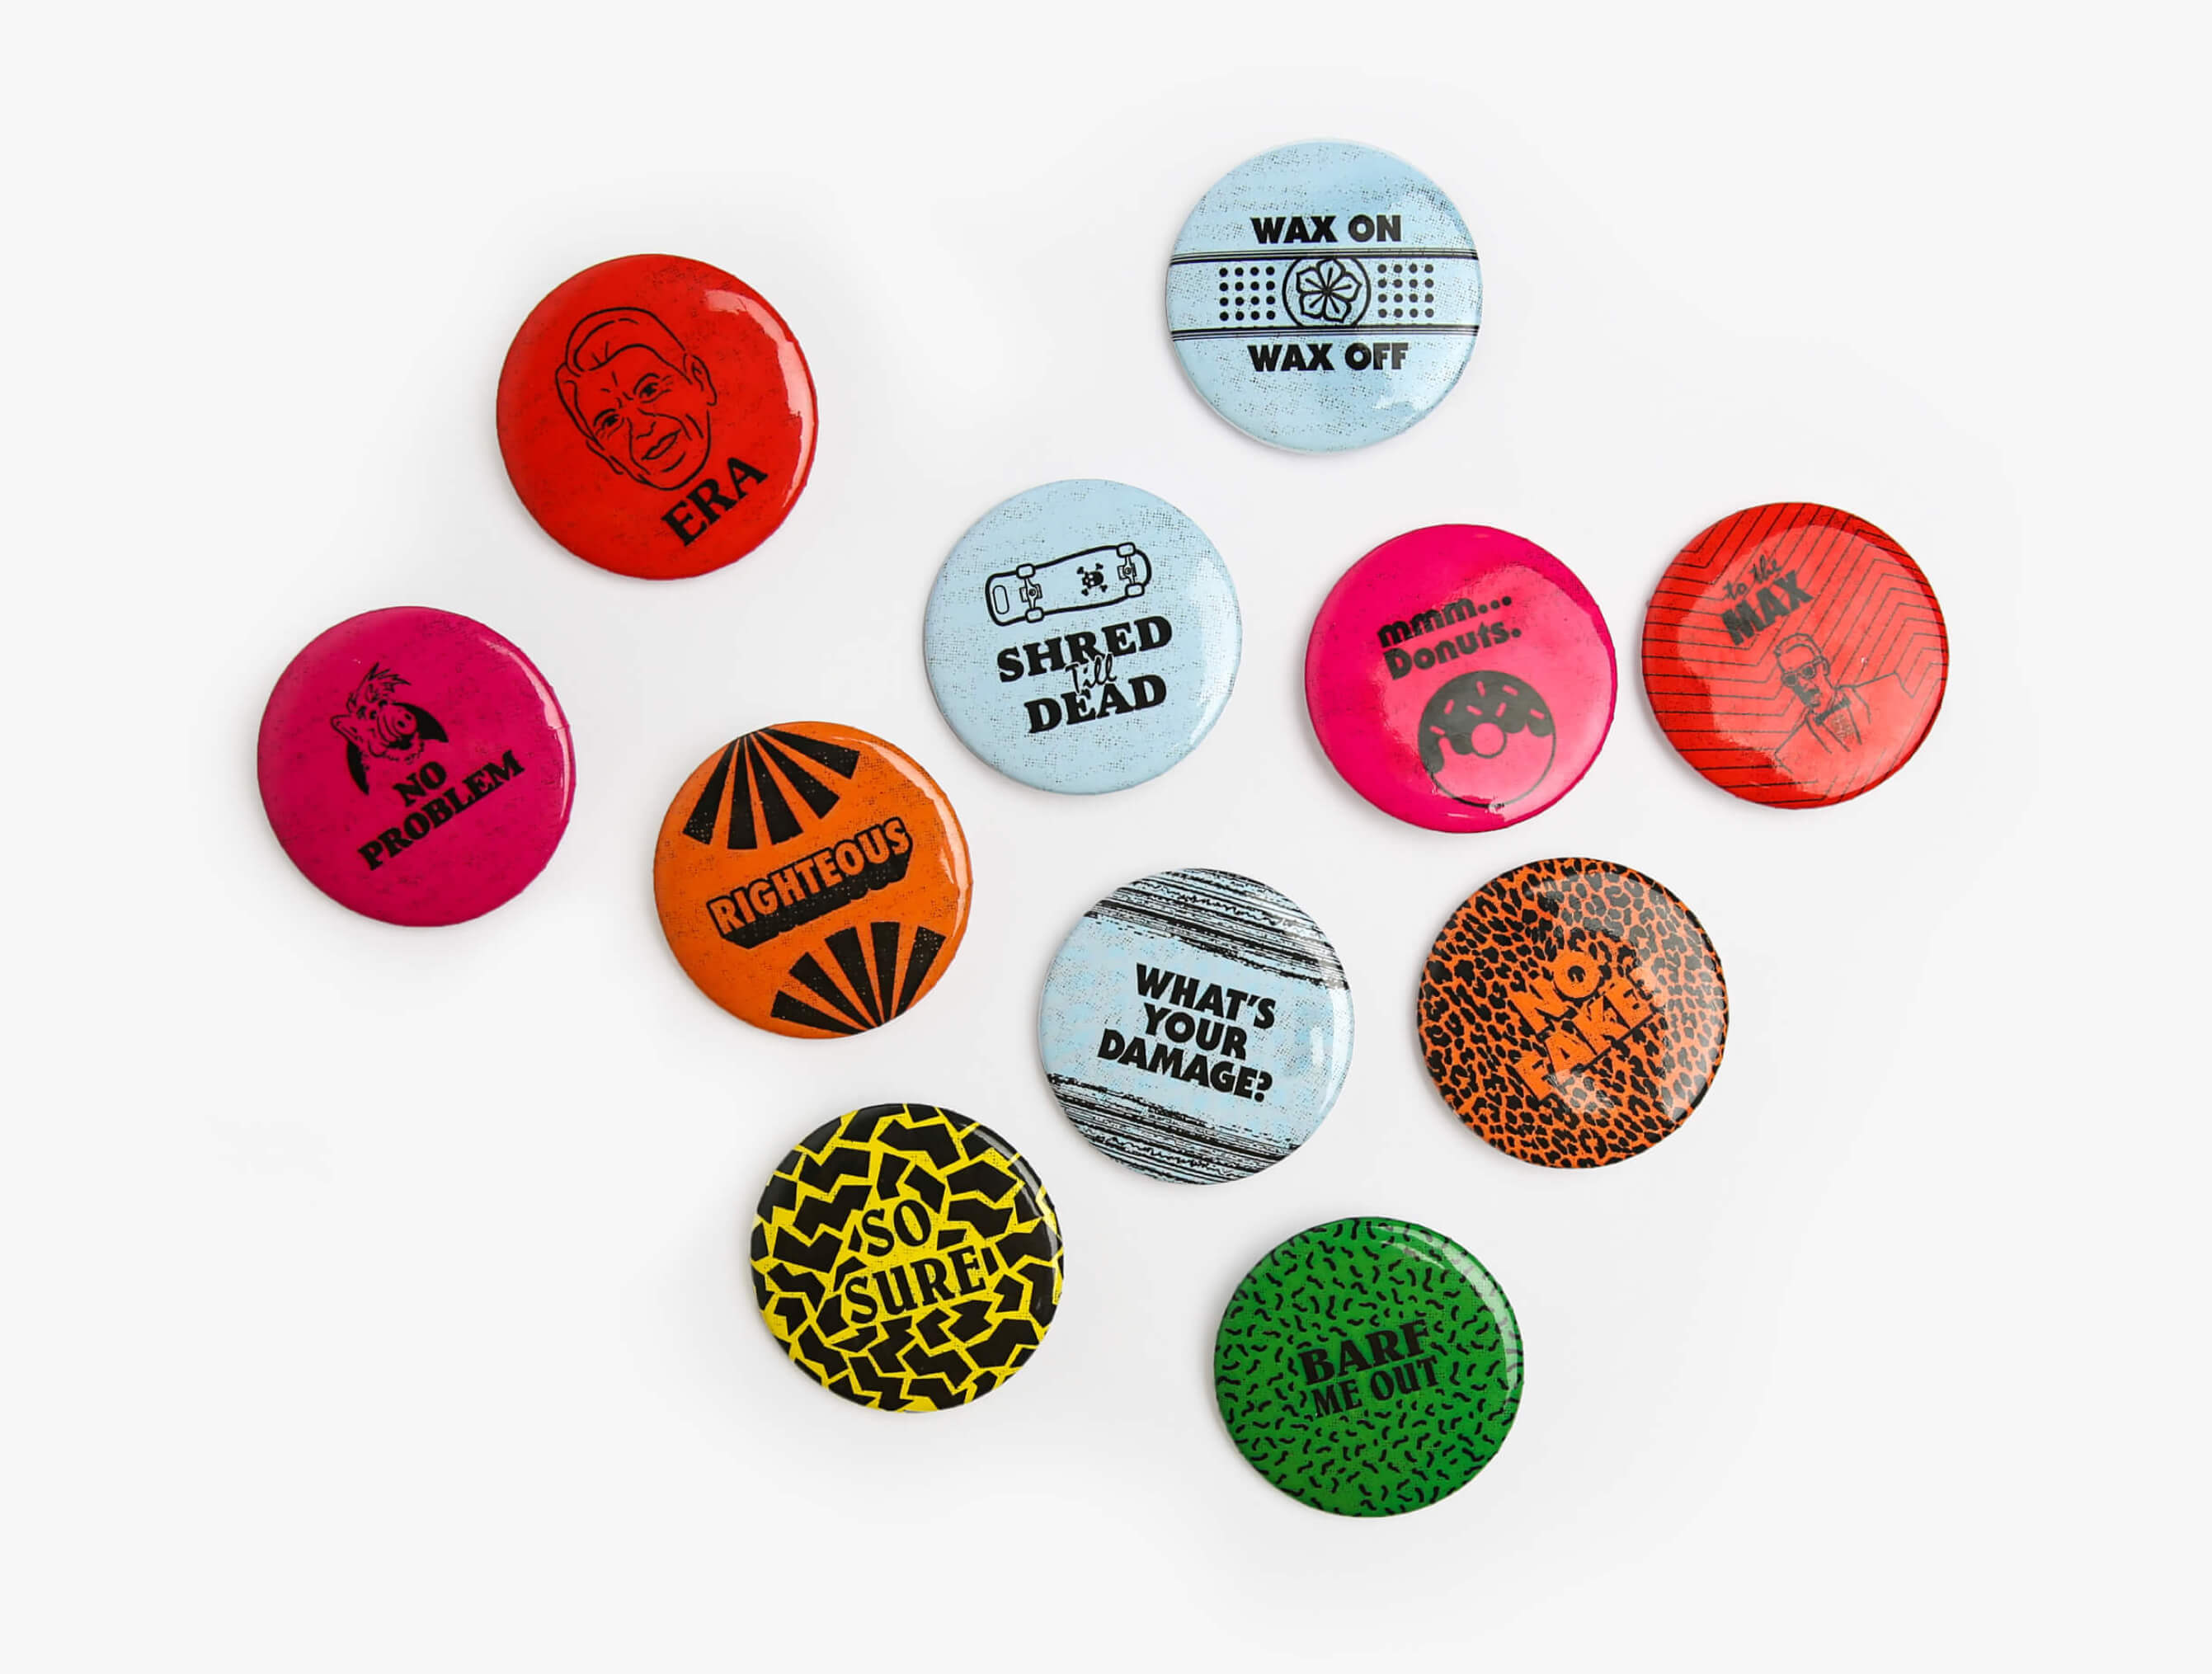 Printed buttons branded for the Raddys given to event guests as part of a table seating identification system including illustrated and typographic designs of Regan era, wax on wax off, to the max, righteous, no problem Alf, mmm donuts, What